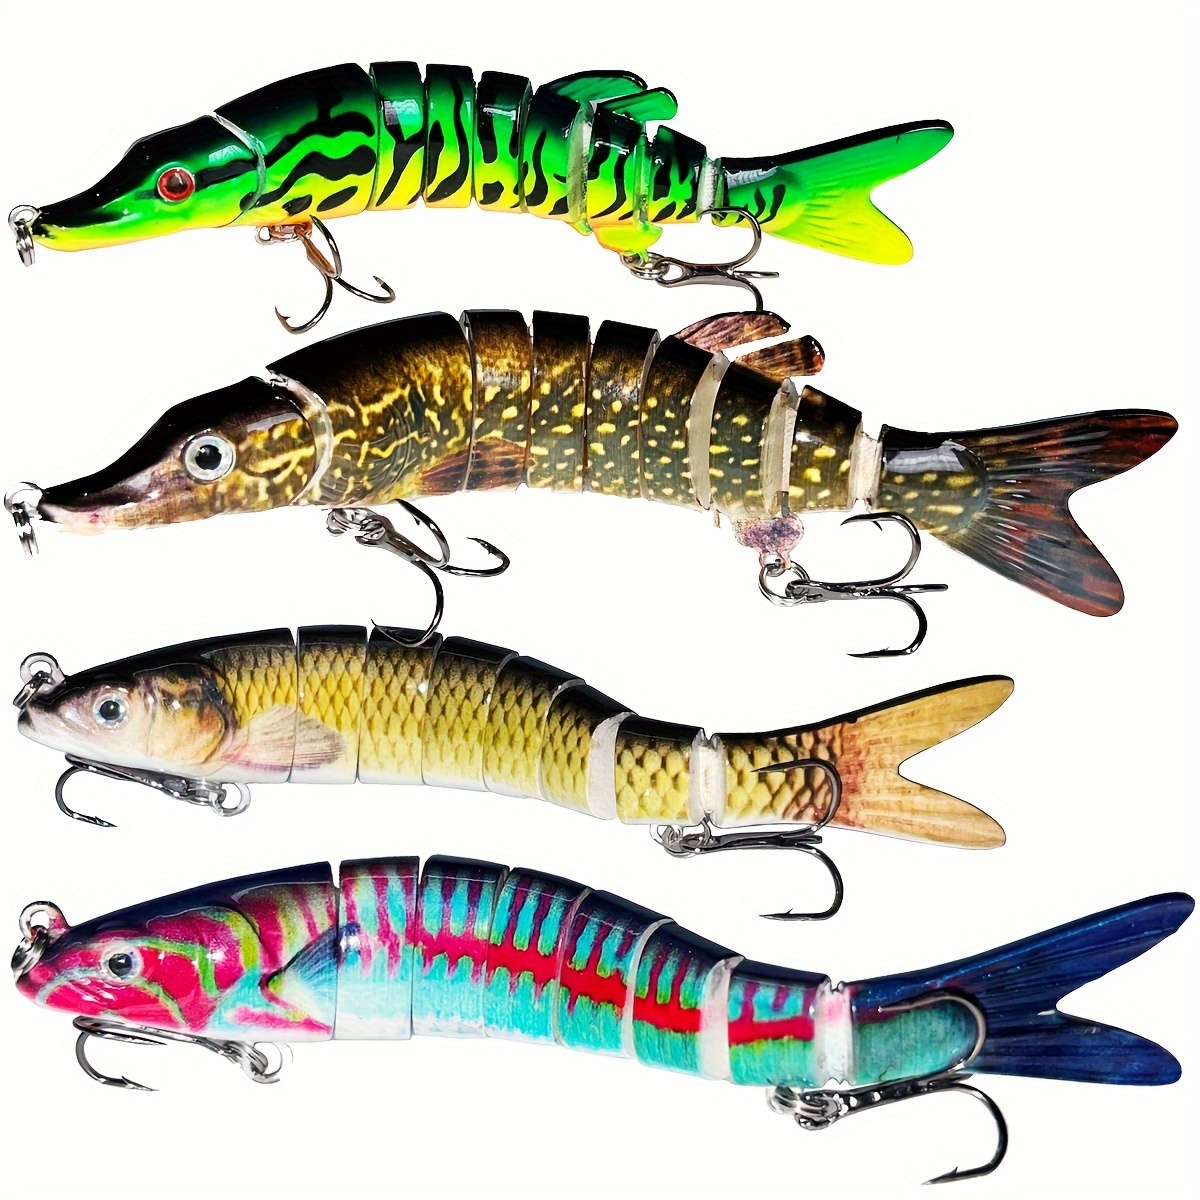 Fishing Lures For Bass Trout, Multi Jointed Swimbaits, Lifelike Fishing  Lure, Slow Sinking Segmented Bass Fishing Lure For Freshwater Or Saltwater